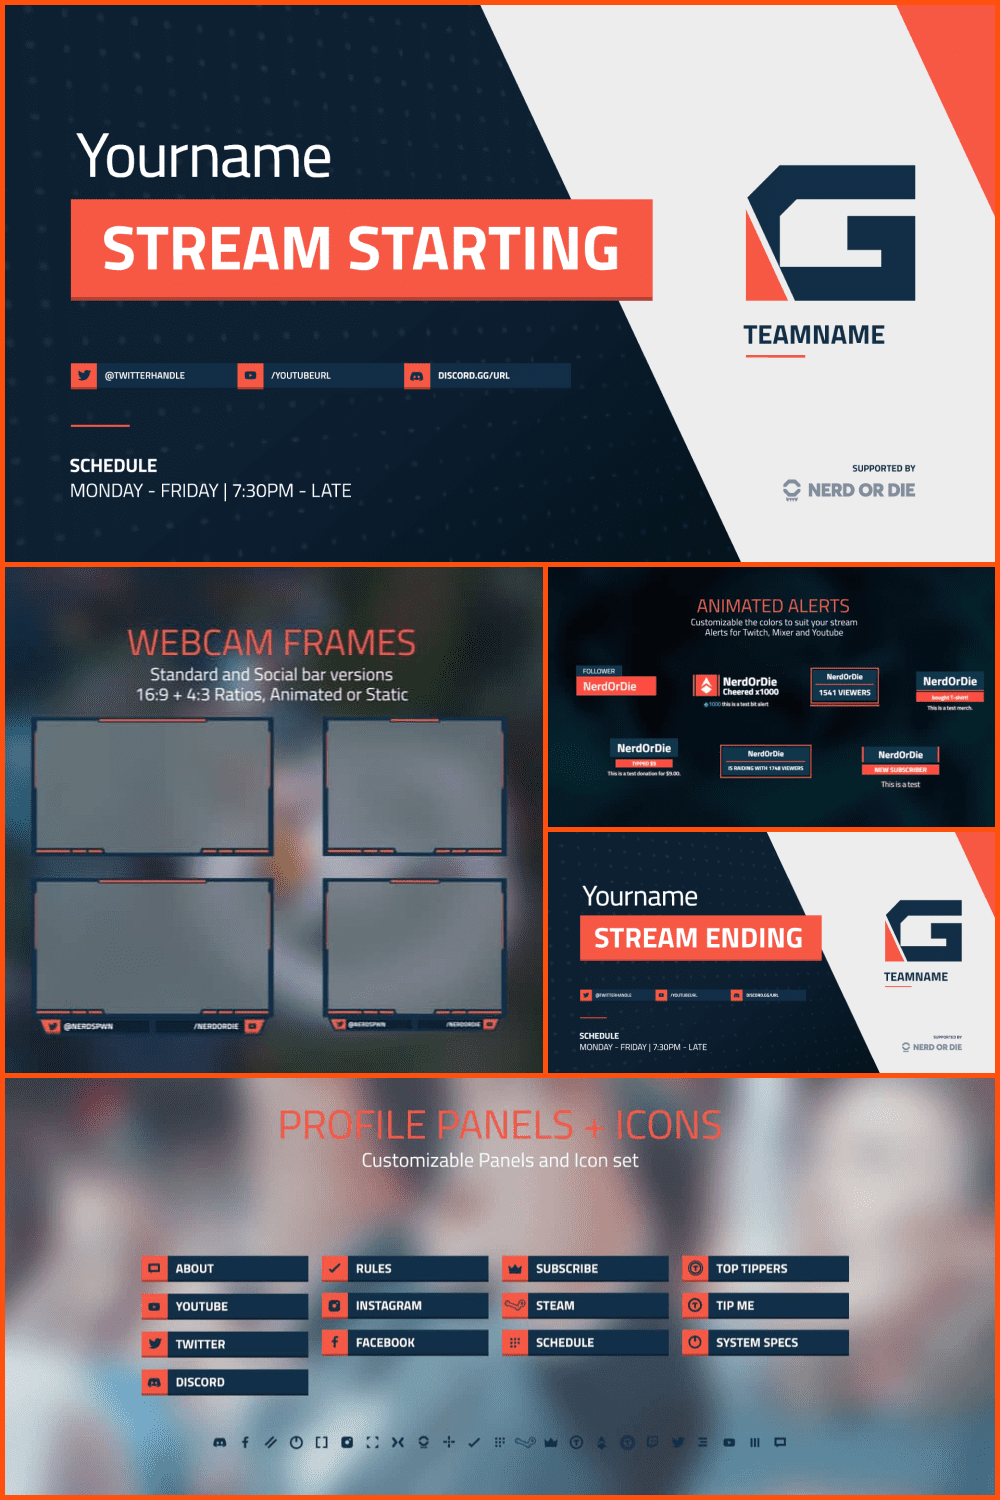 A contemporary, sleek overlay design aimed at the competitive.